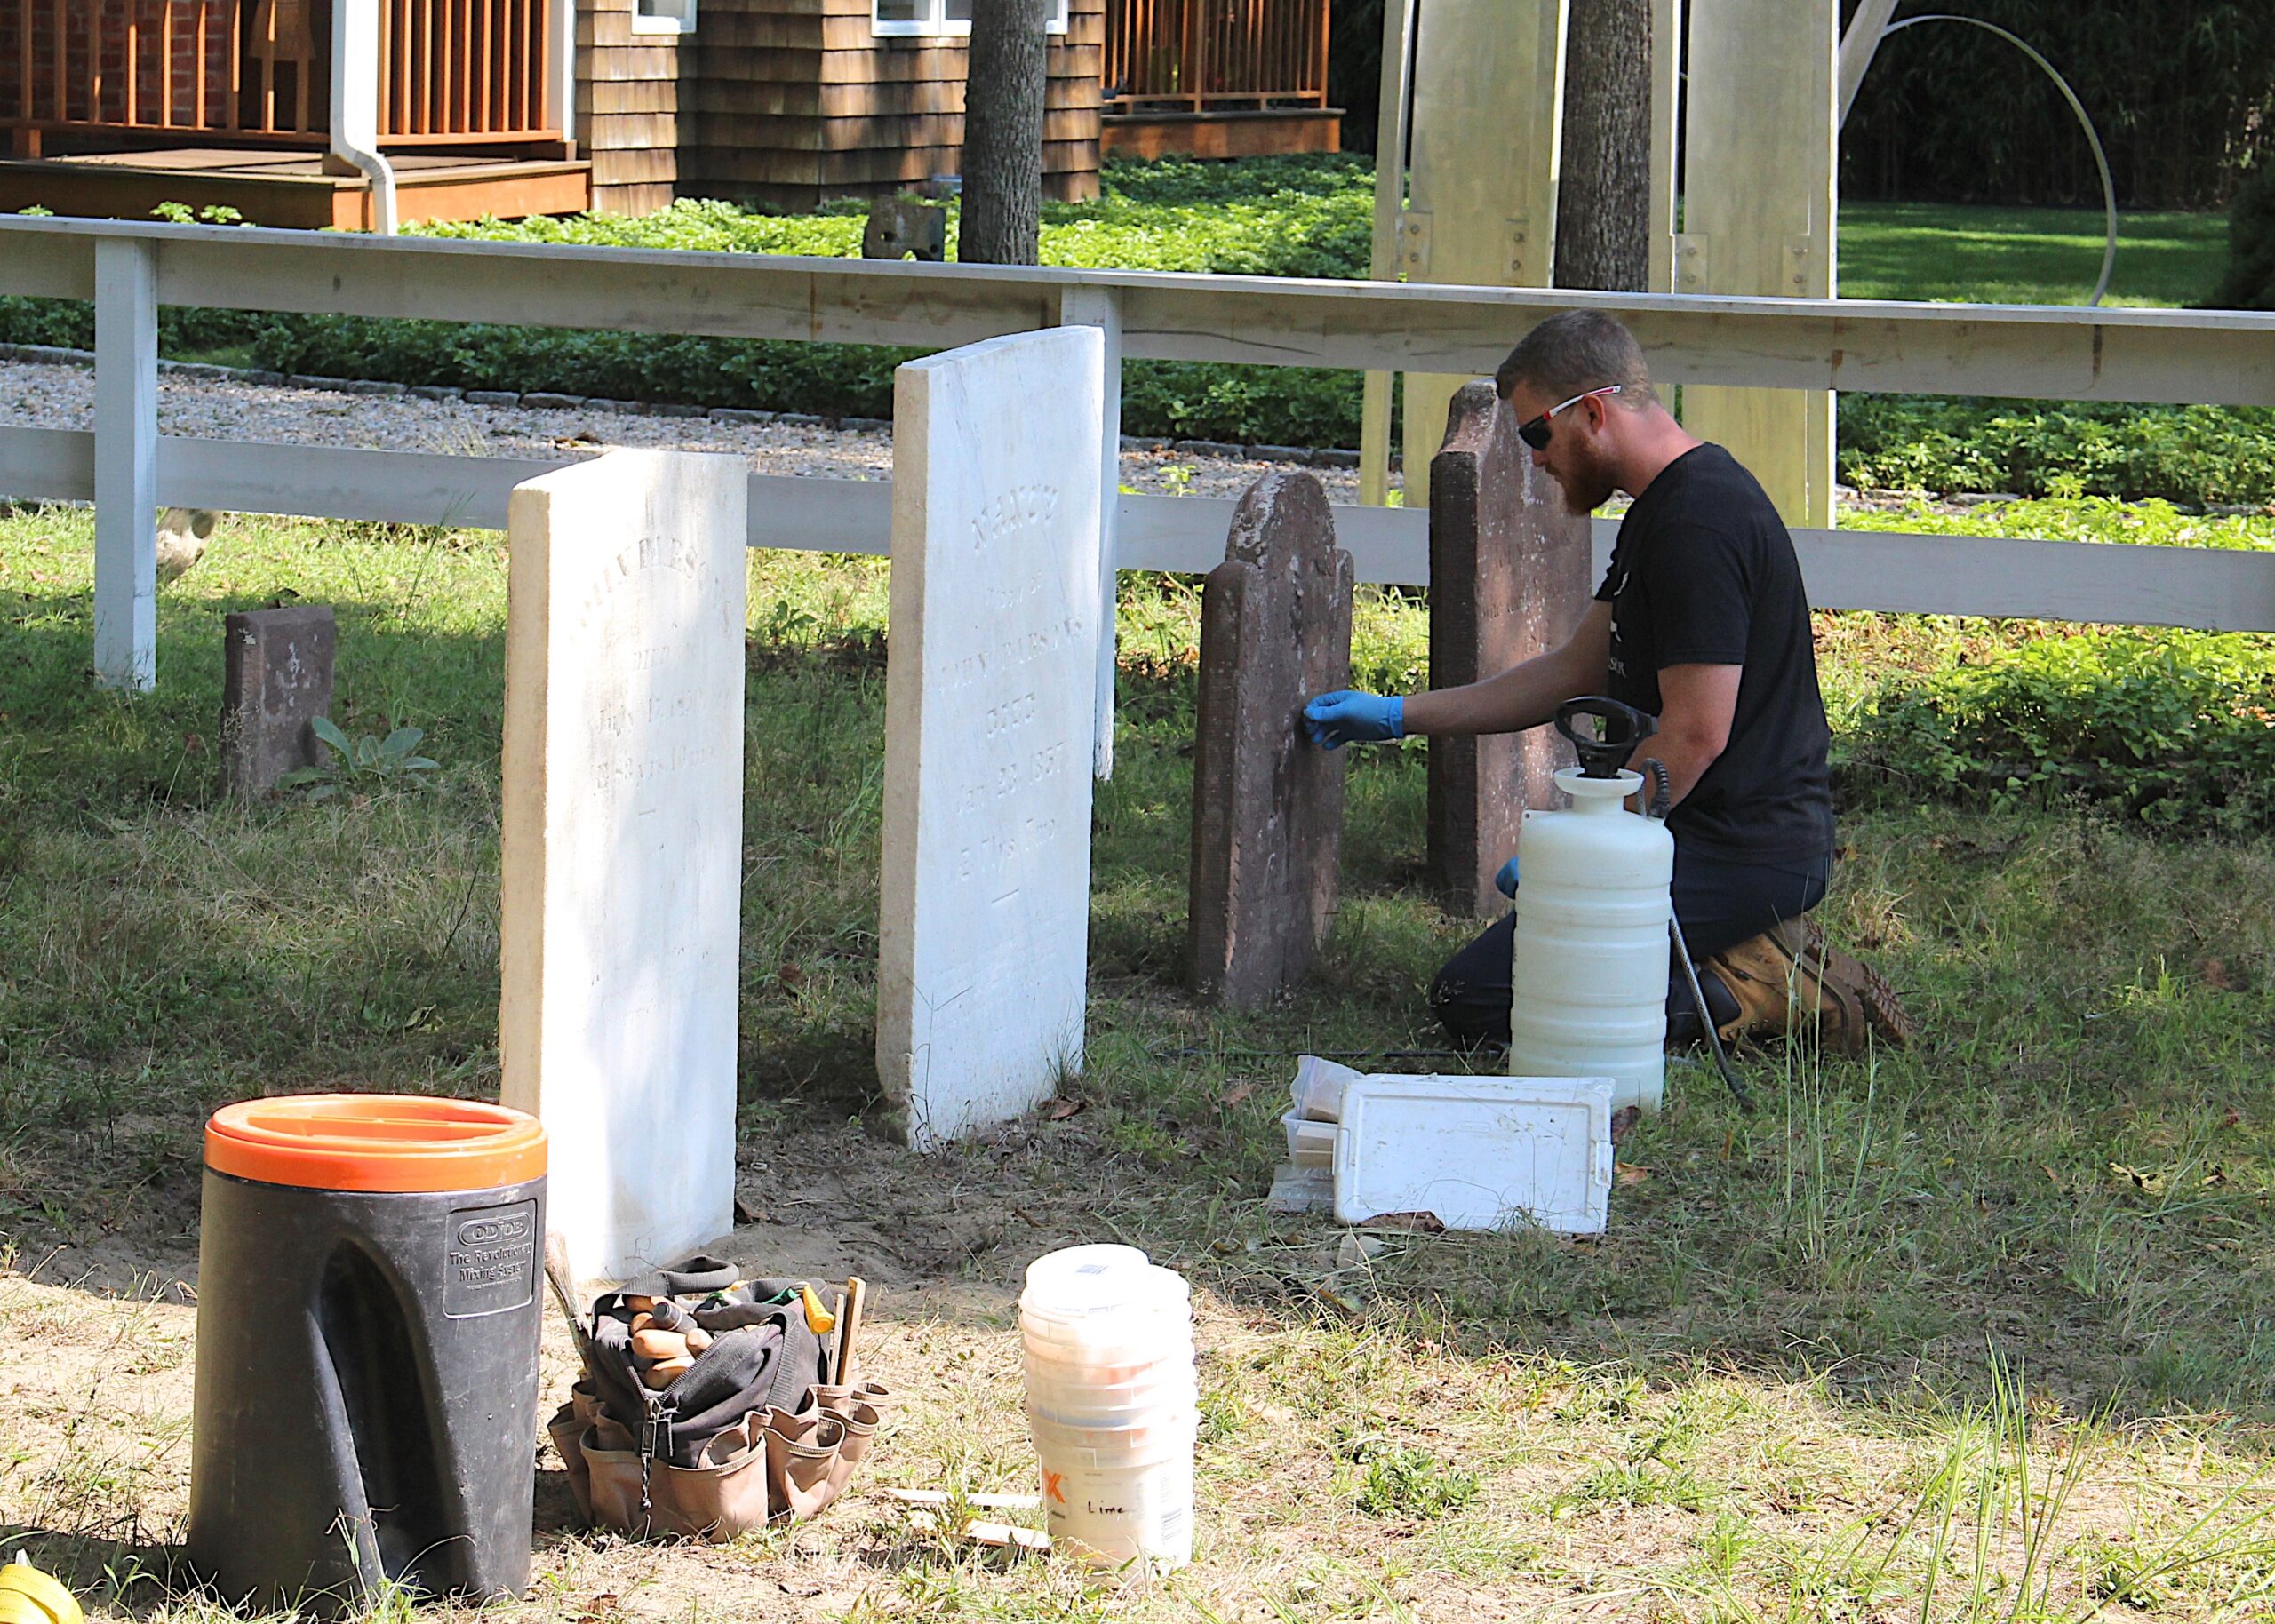 Joel Snodgrass and his son Kole restored gravestones in the Hog Creek Cemetery, including one of a 20-month old baby named Easter Persons who died just two days before Christmas in 1782.